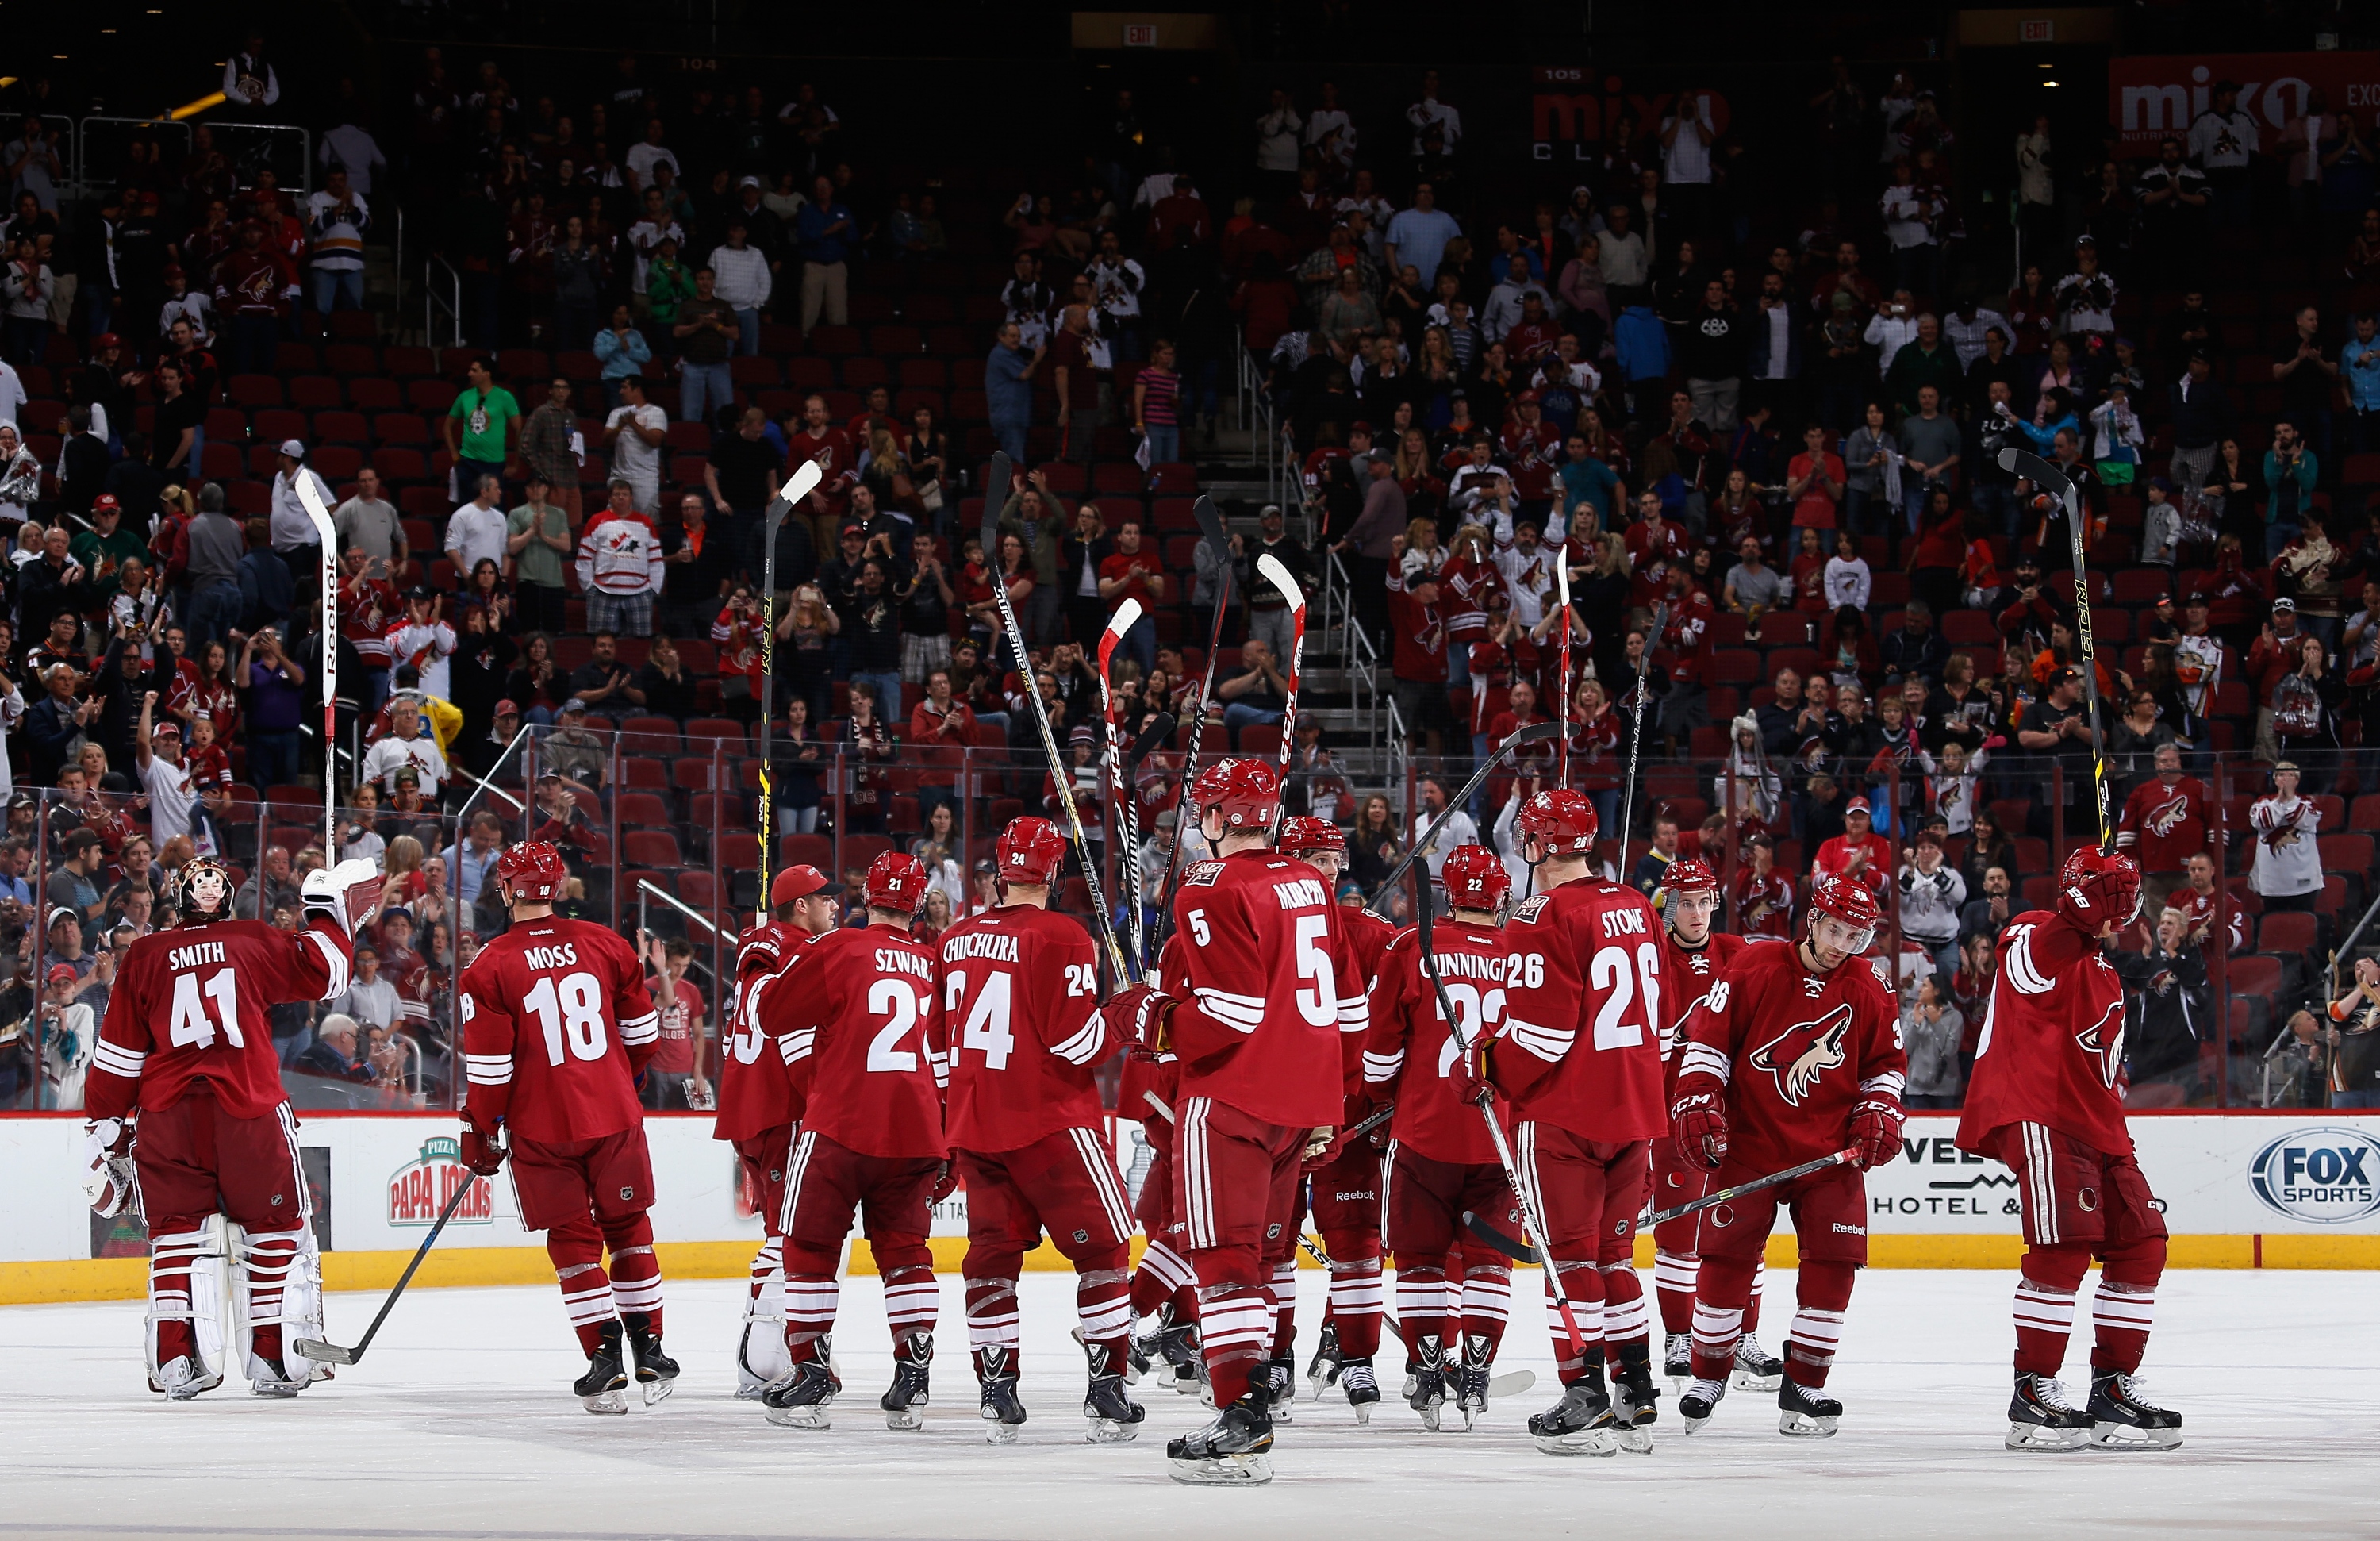 GLENDALE, AZ - APRIL 11:  The Arizona Coyotes salute the fans following the NHL game against the Anaheim Ducks at Gila River Arena on April 11, 2015 in Glendale, Arizona. The Ducks defeated the Coyotes 2-1.  (Photo by Christian Petersen/Getty Images)